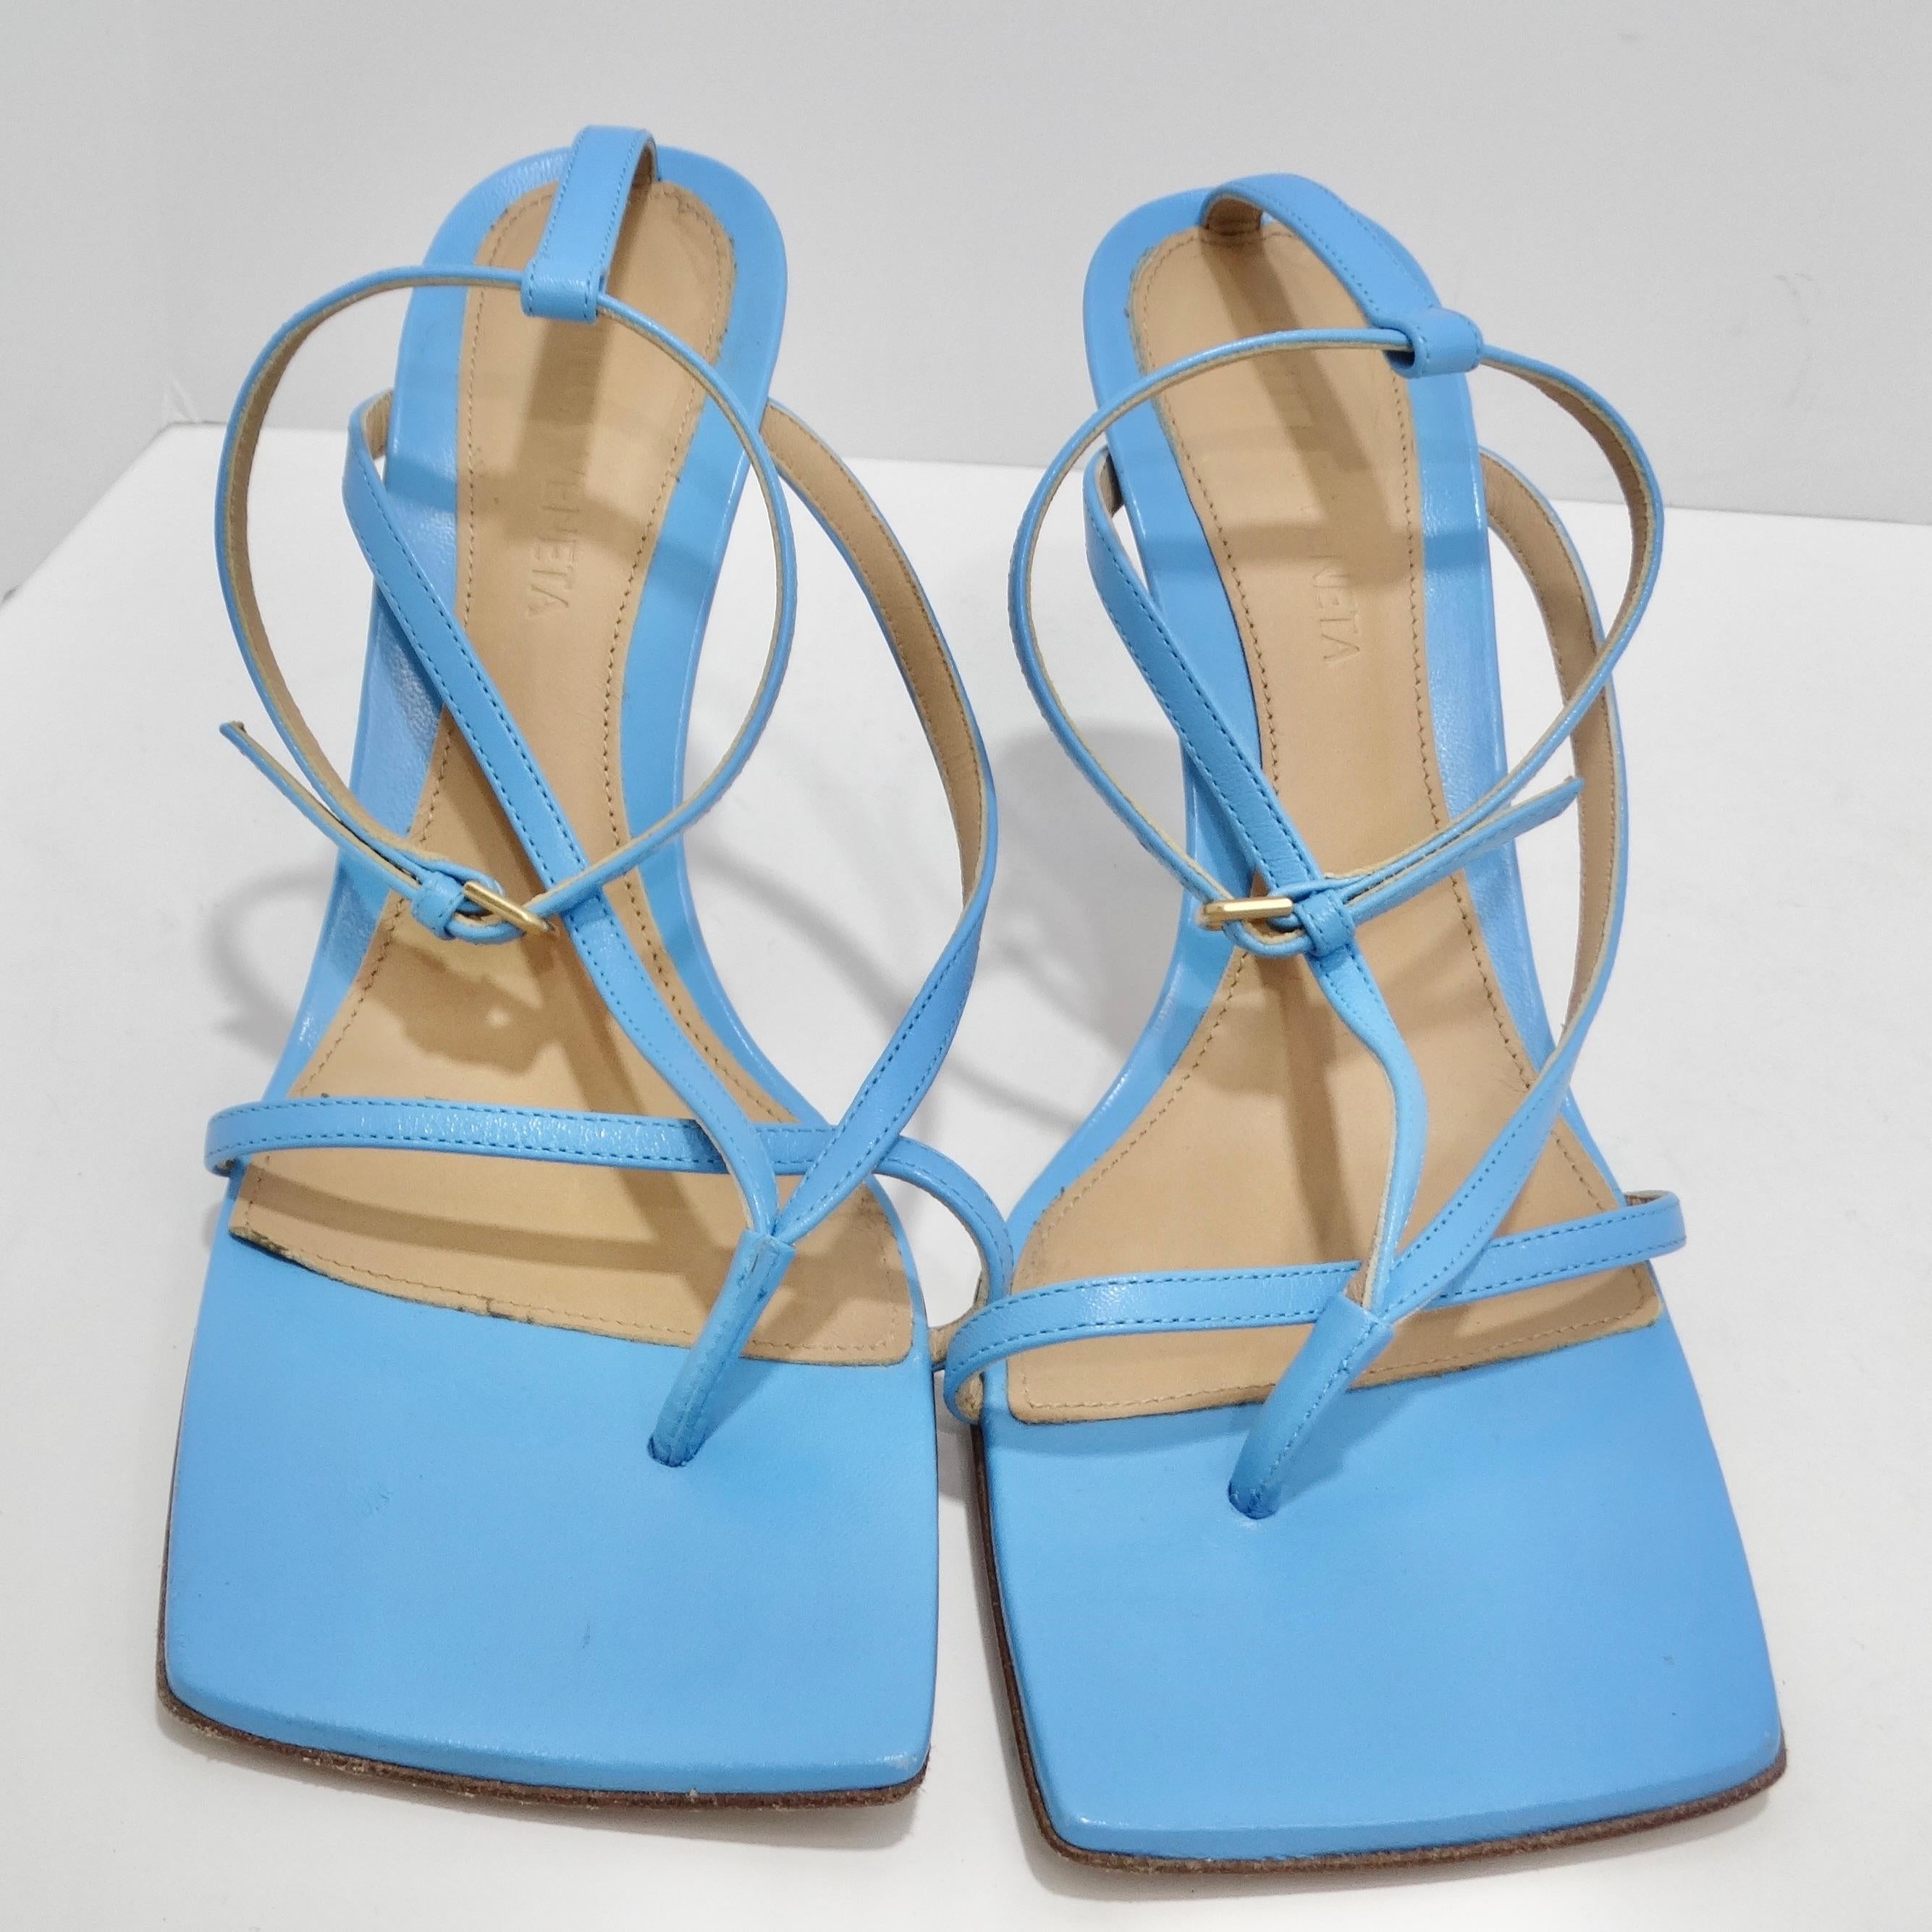 Elevate your footwear game with the Bottega Veneta Stretch Square Toe Leather Sandals in a stunning shade of sky-blue. Crafted with precision and style in mind, these sandals are a true embodiment of Bottega Veneta's minimalist design philosophy